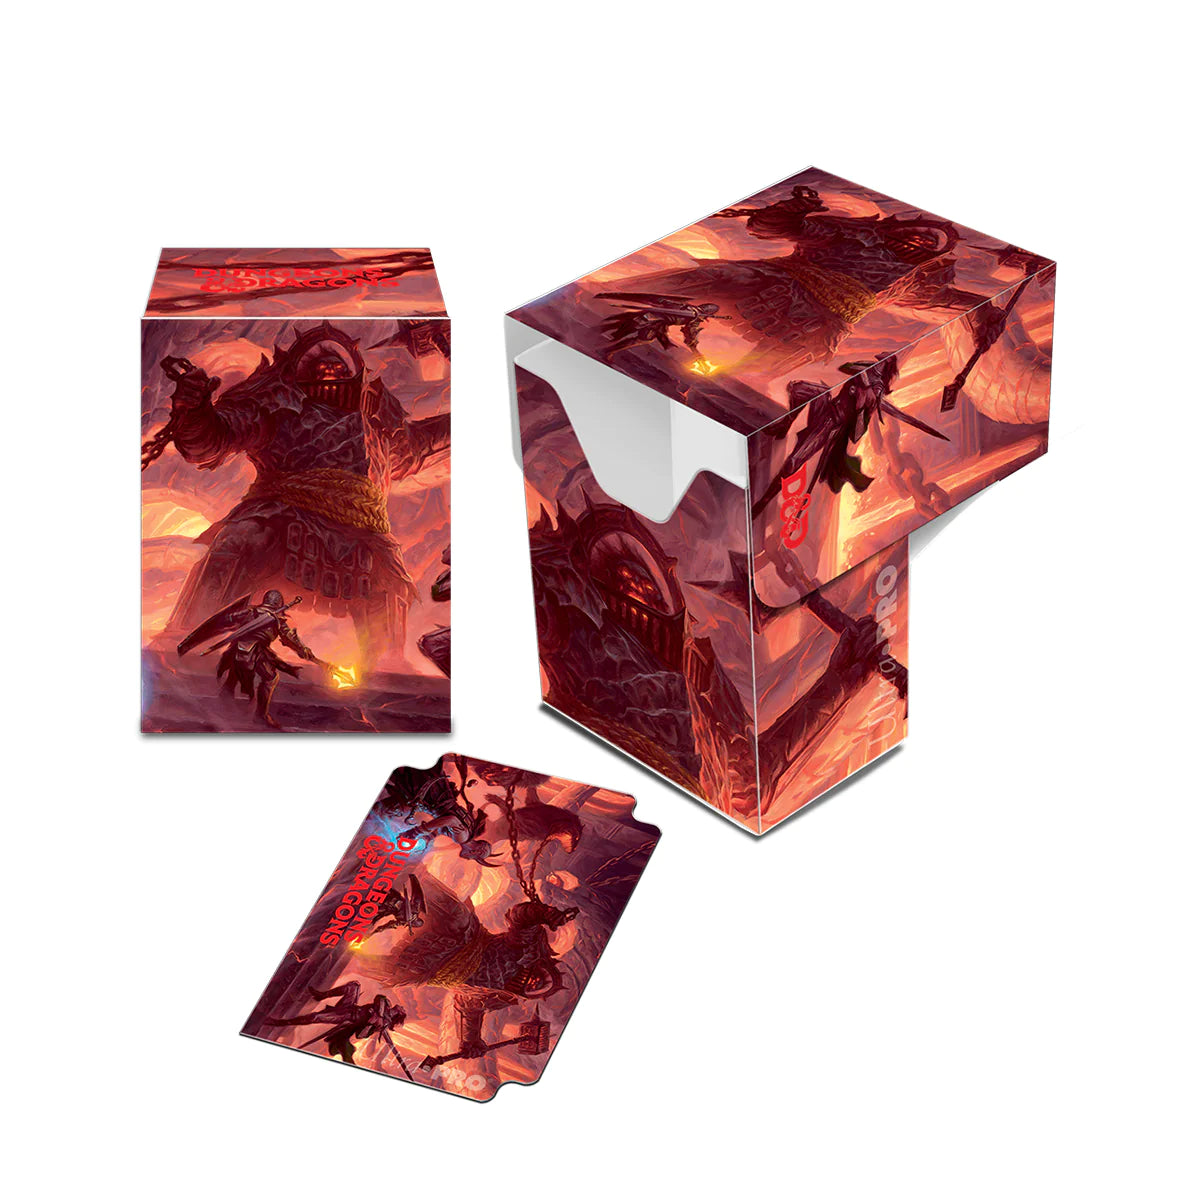 Dungeons & Dragons Deck - Box Fire Giant